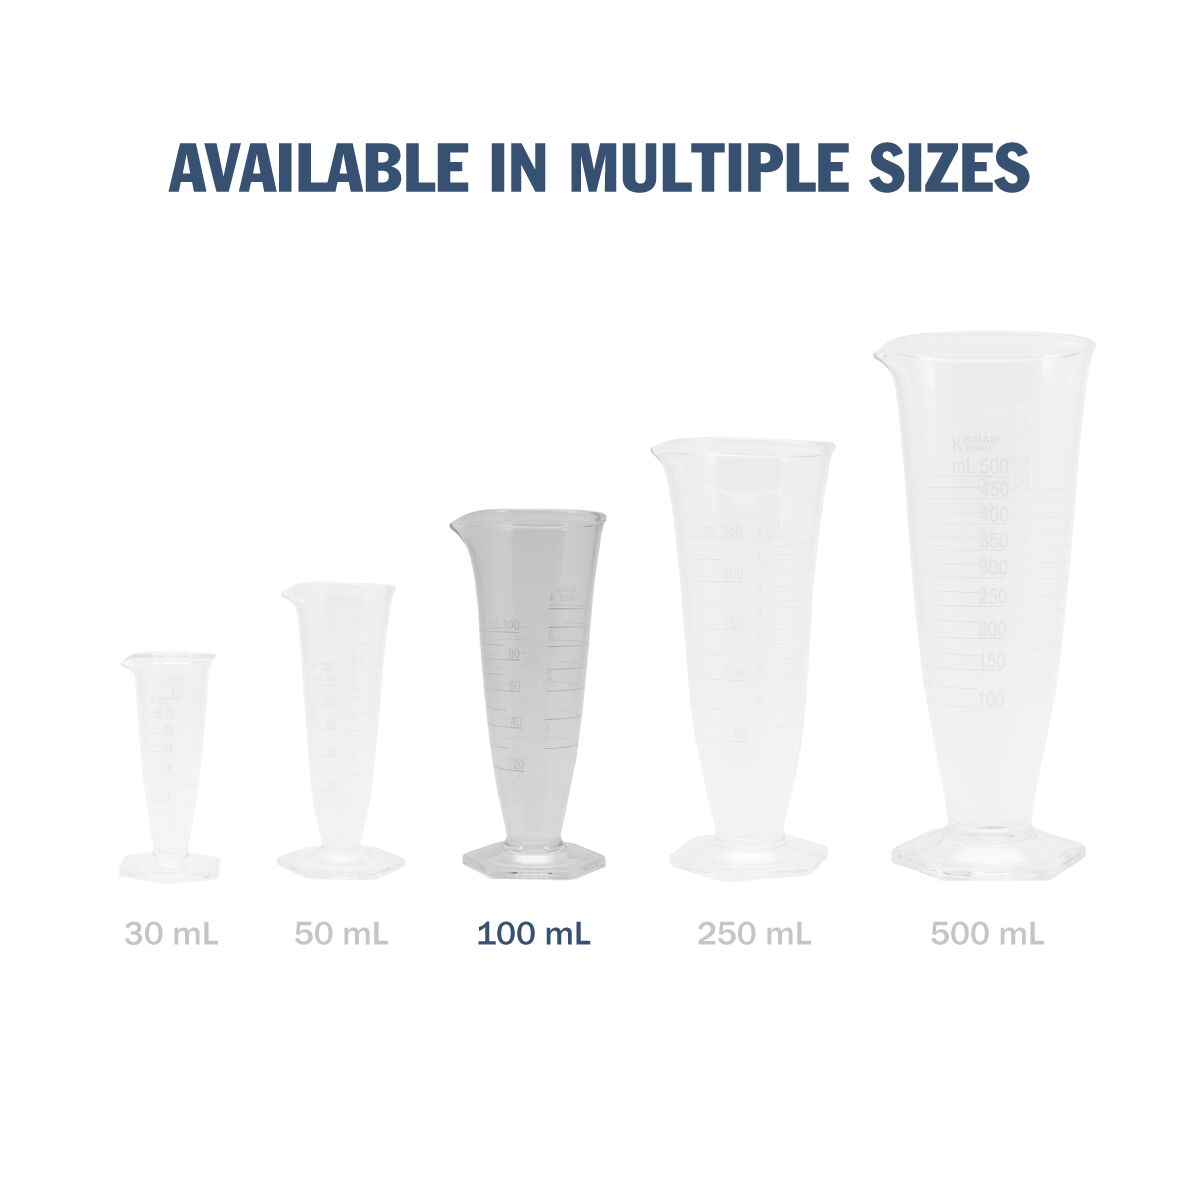 Kimax® Glass Pharmaceutical Dual-Scale Graduates available in multiple sizes - 100 mL